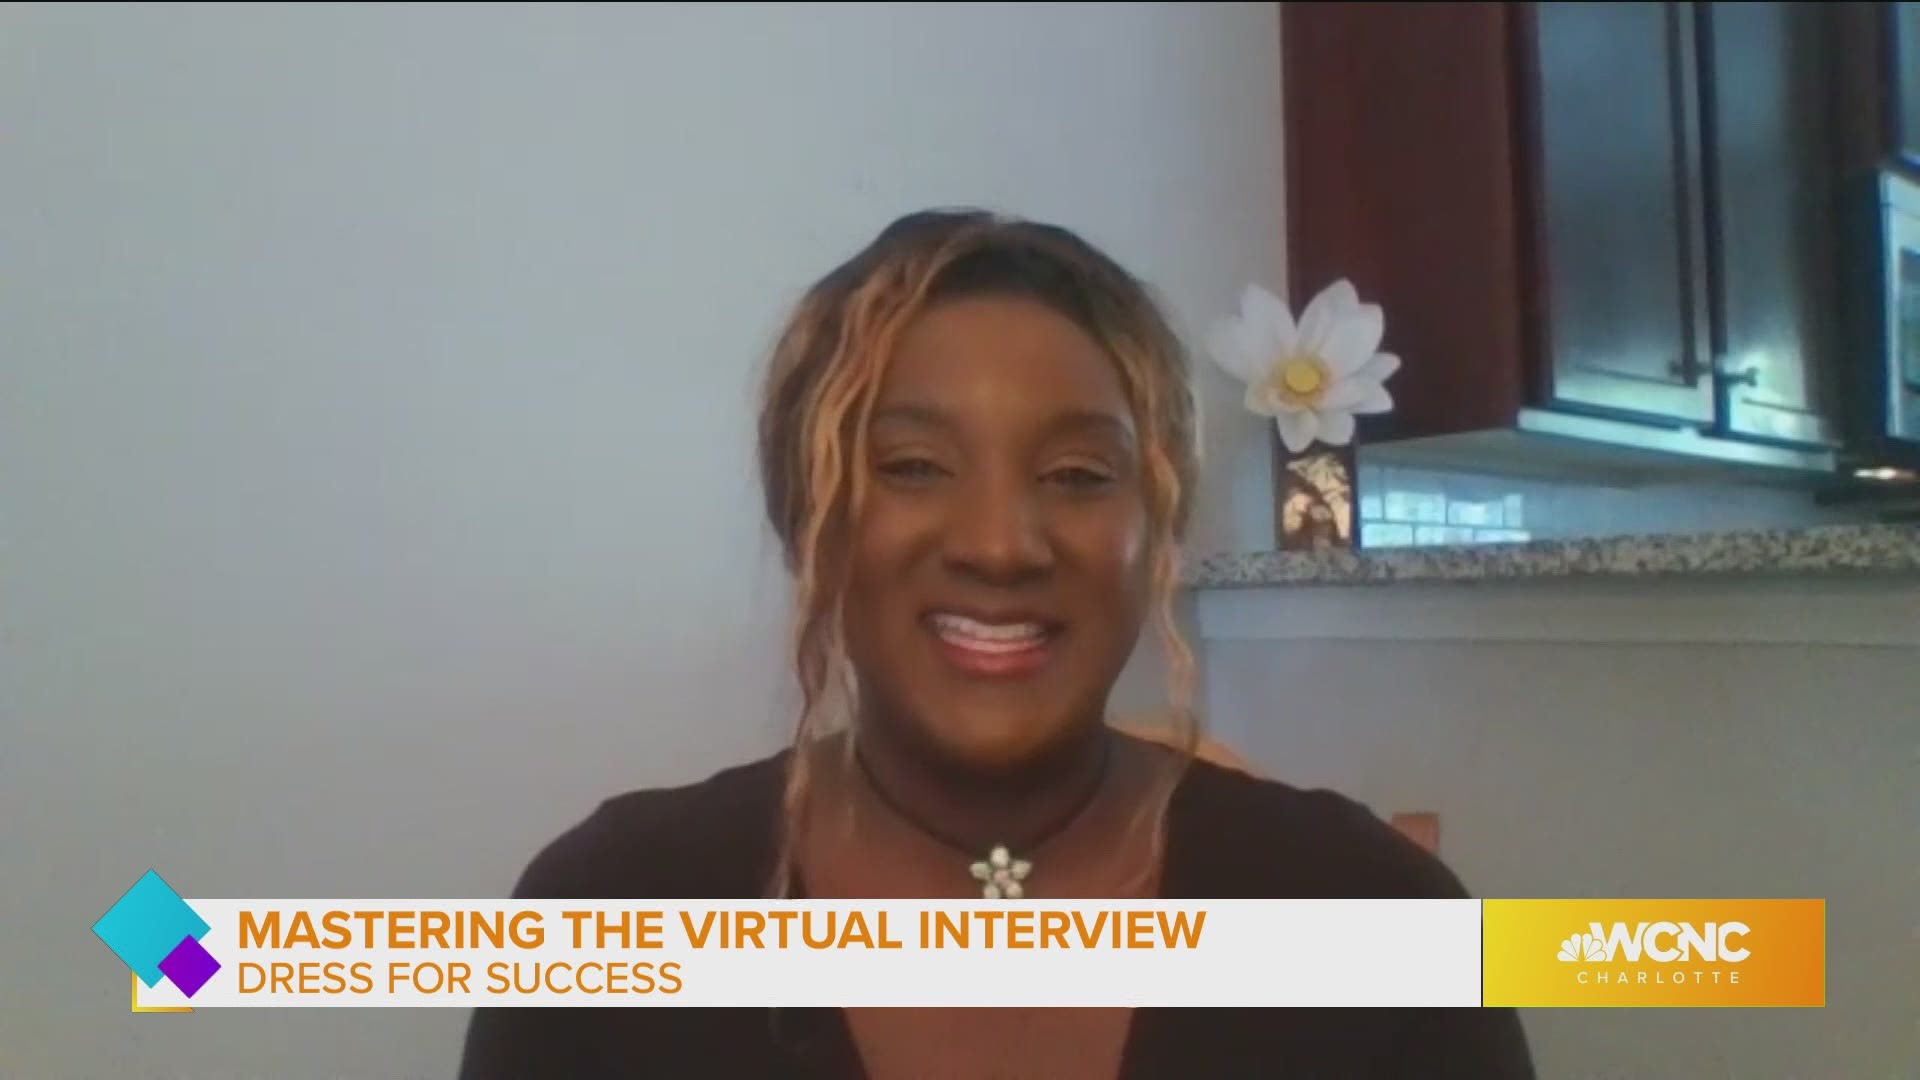 A career expert offers advice on nailing your virtual interview